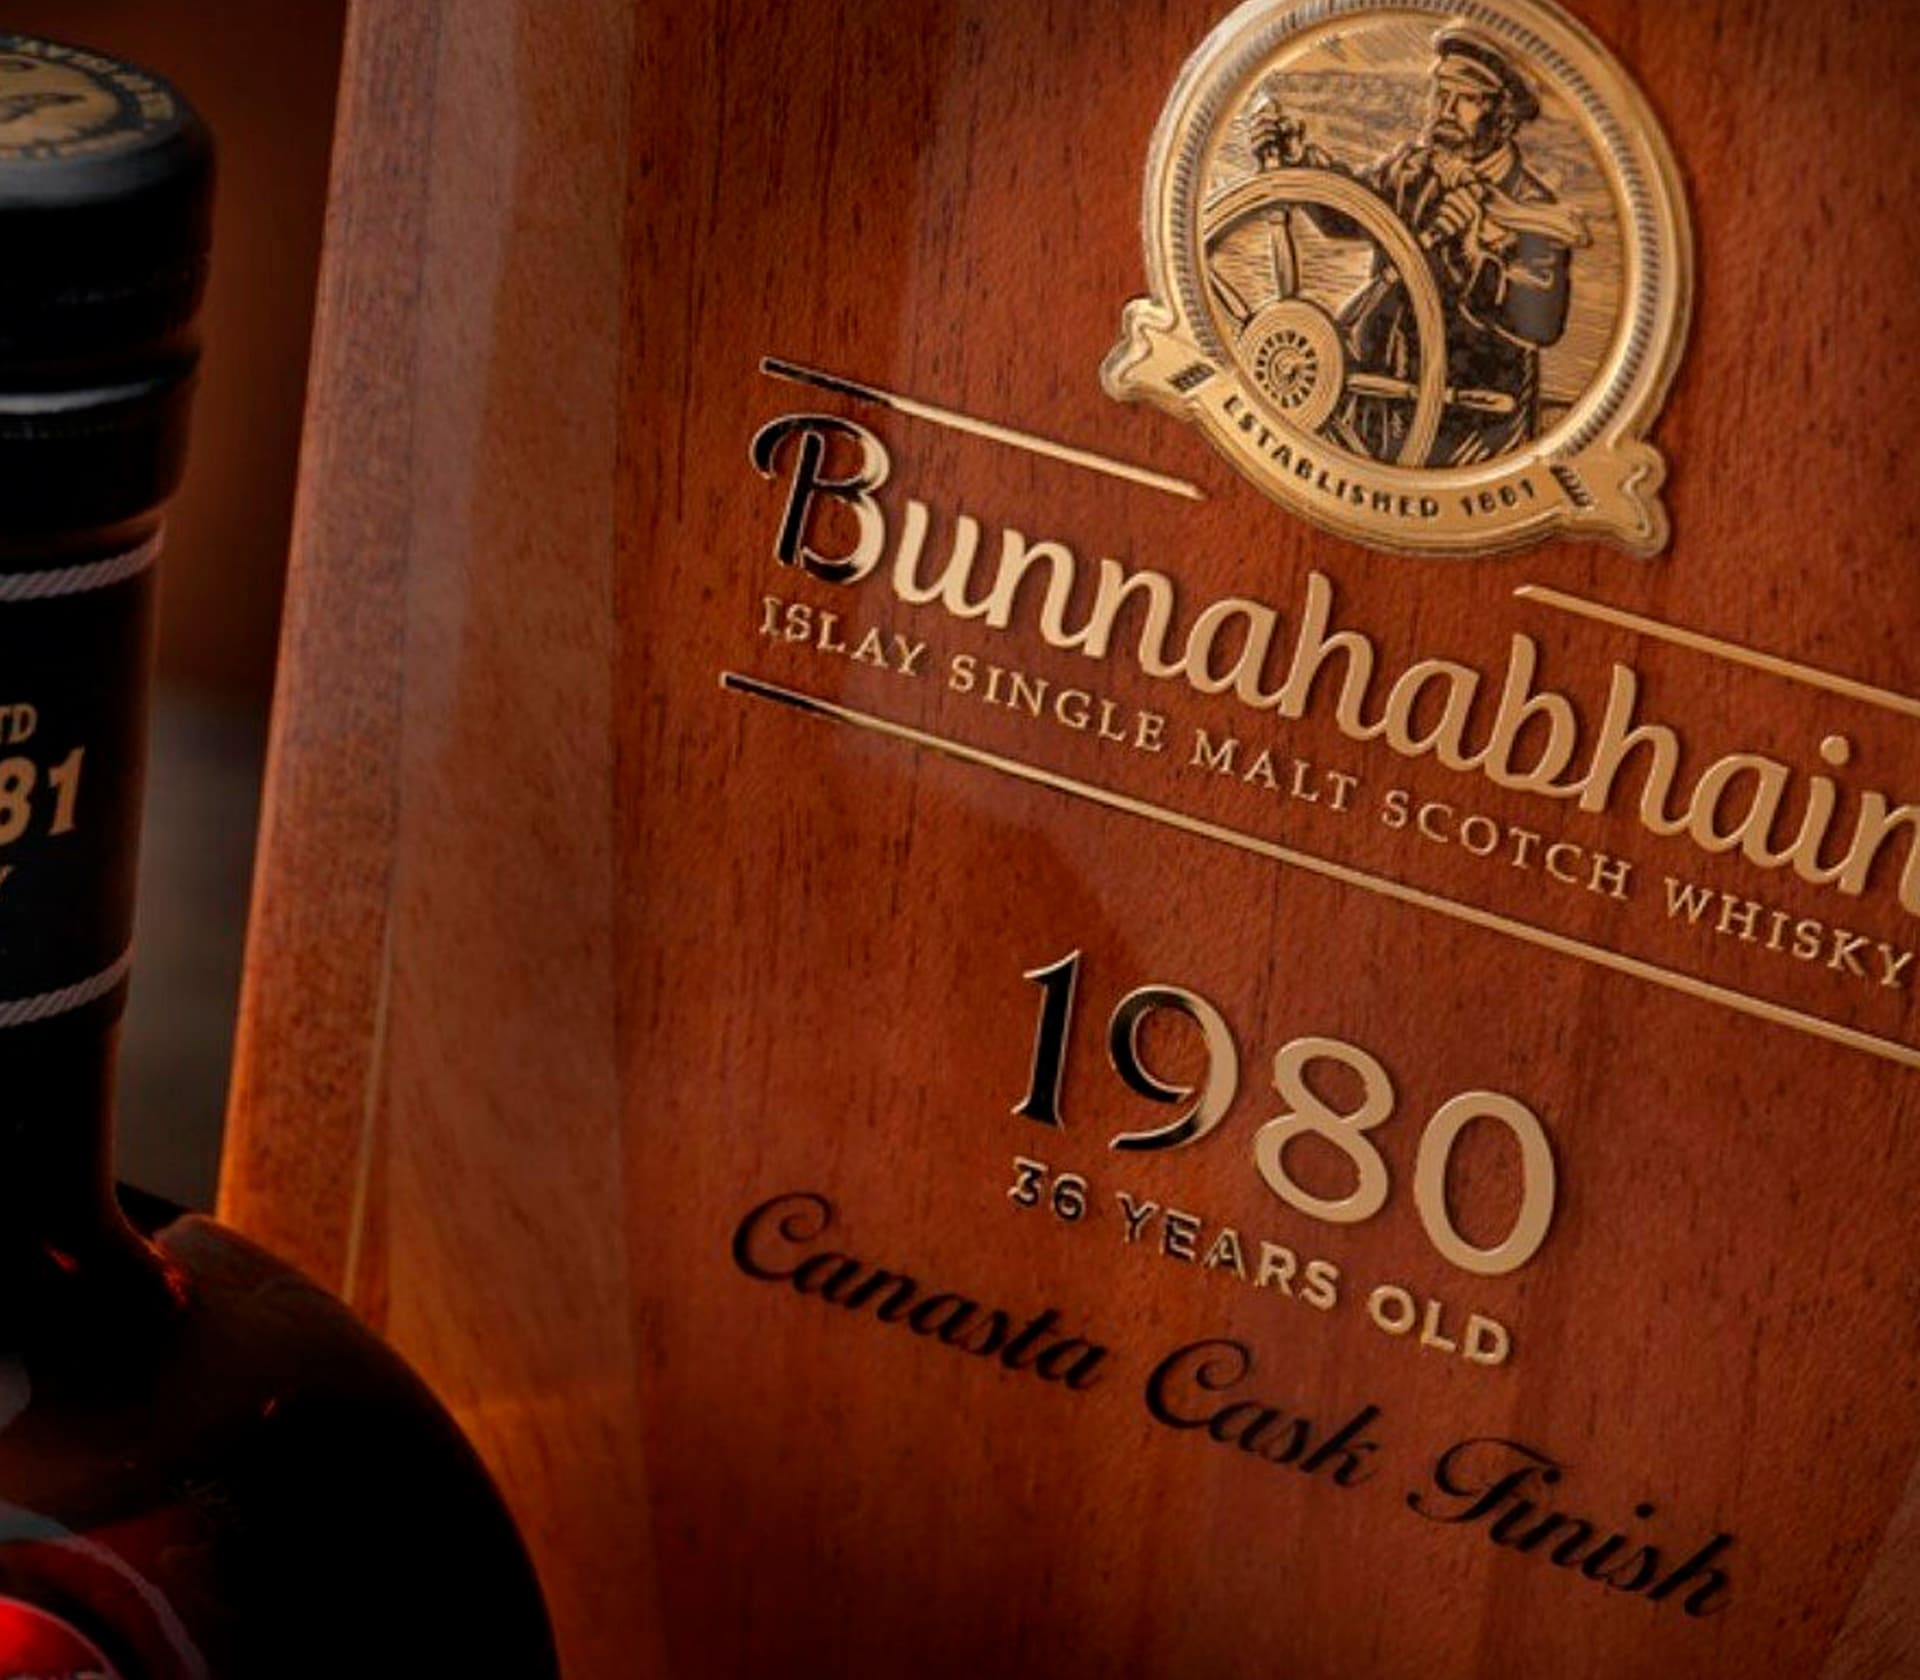 Limited Edition 1980 Canasta Cask Finish